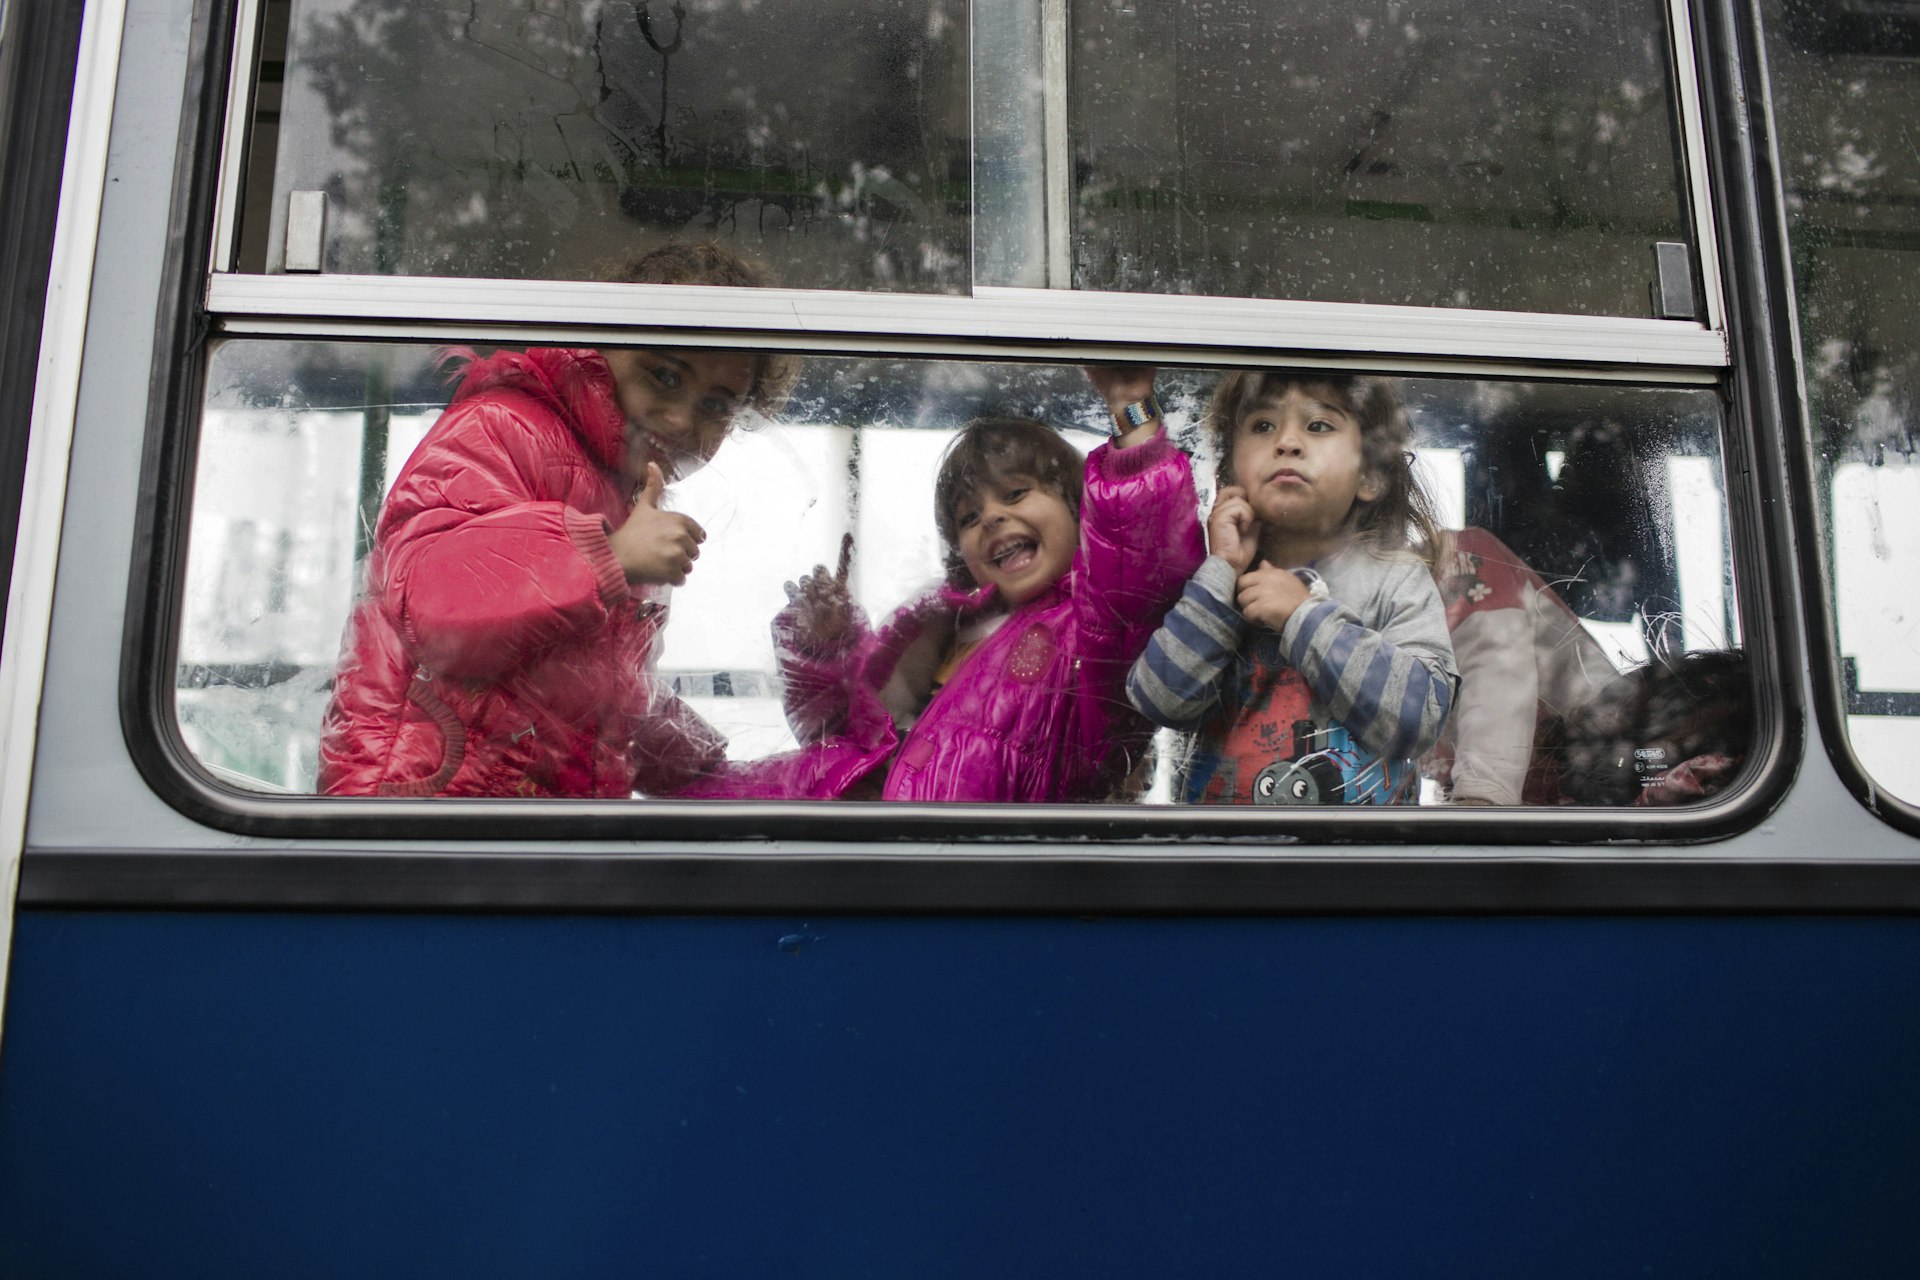 Children waiting on a refugee bus in Hungary.